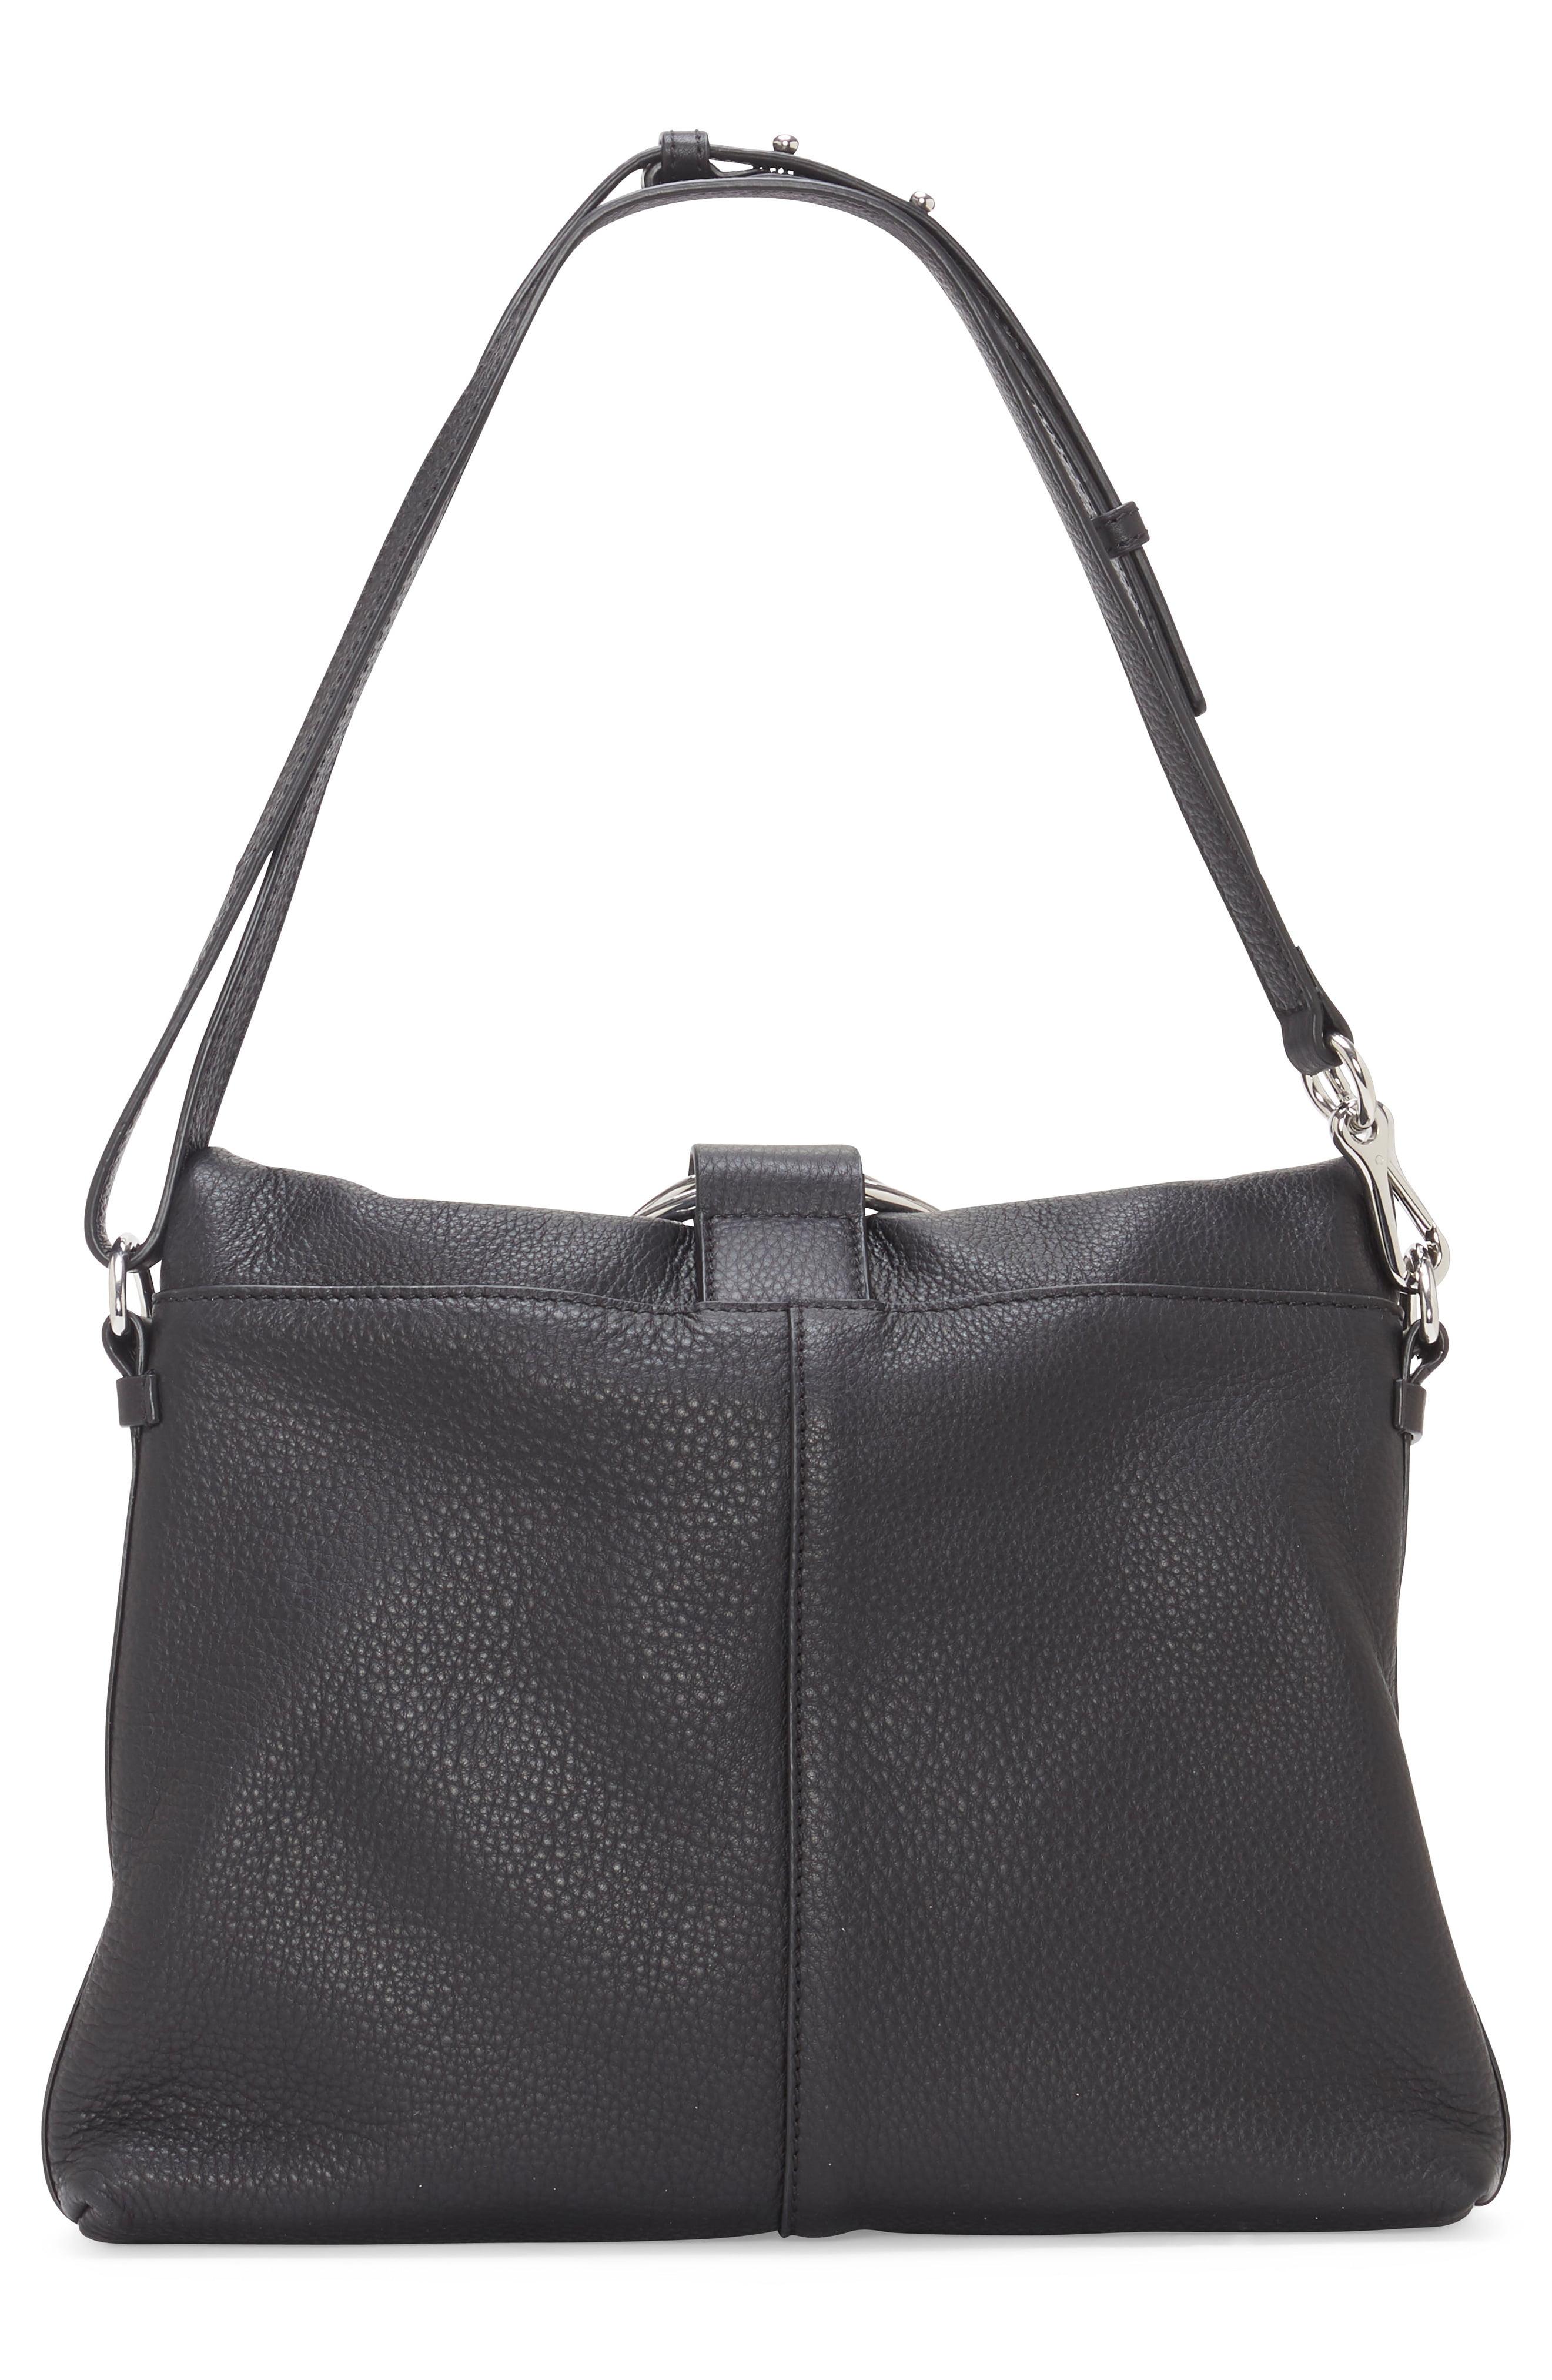 Vince Camuto Kimi Large Leather Crossbody Bag in Nero (Black) - Lyst